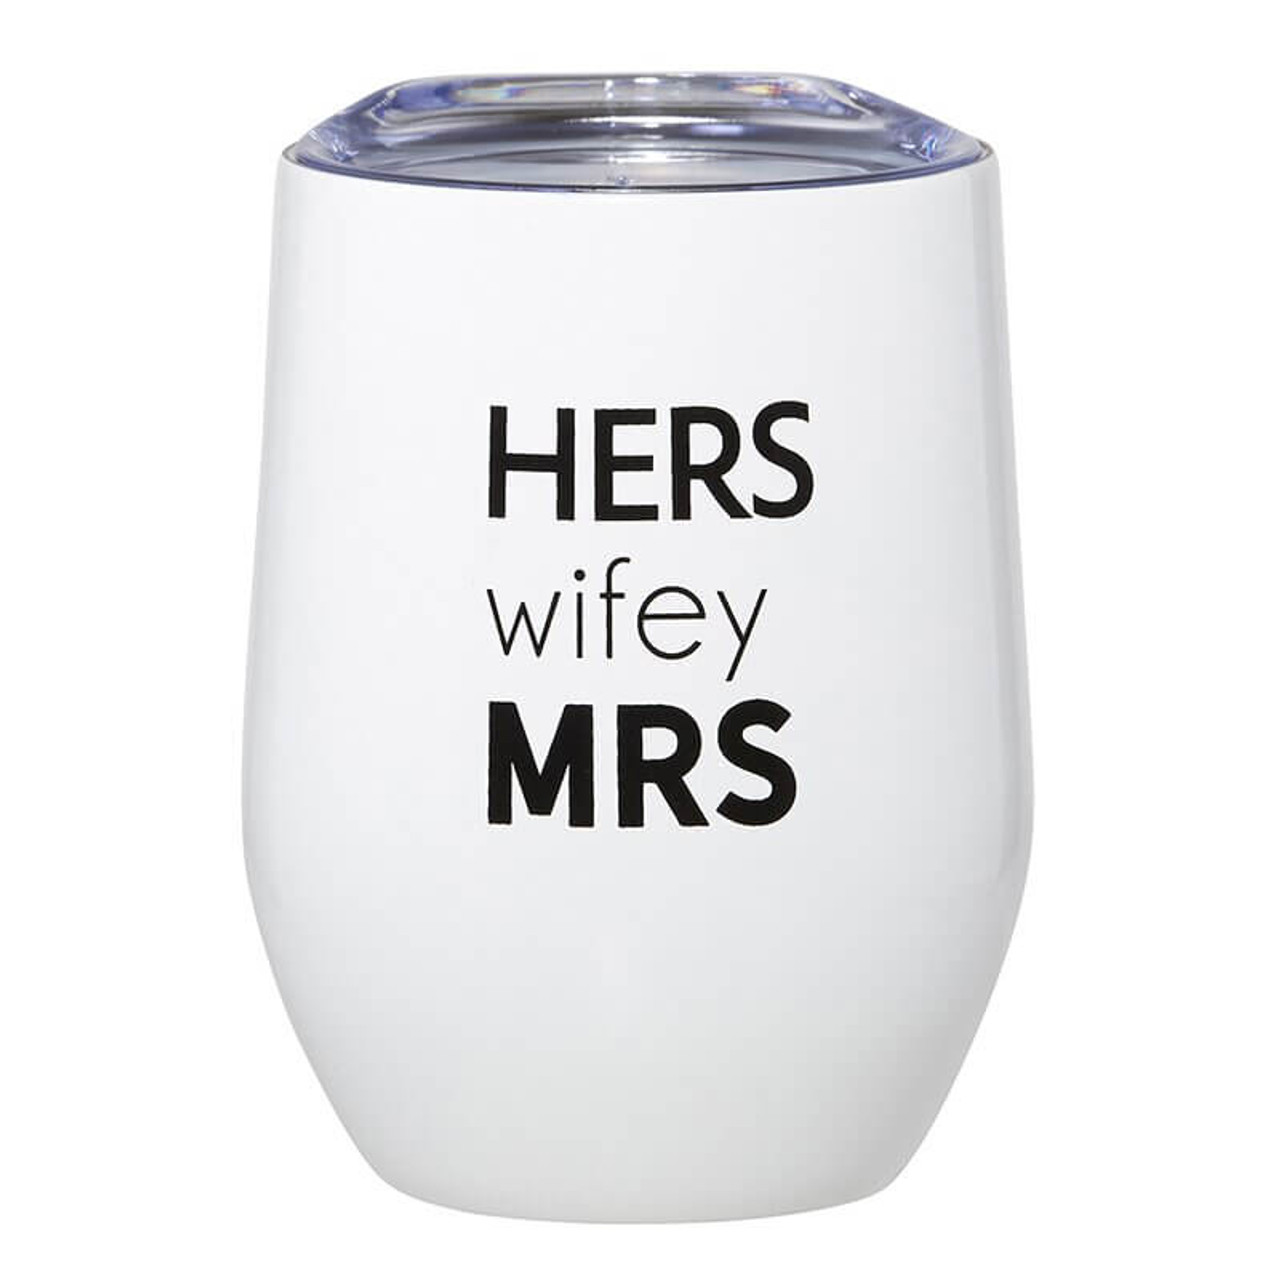 Drink in style with this stainless steel 12 oz. wine tumbler! Keeps your favorite beverages hot or cold. Hand wash only.